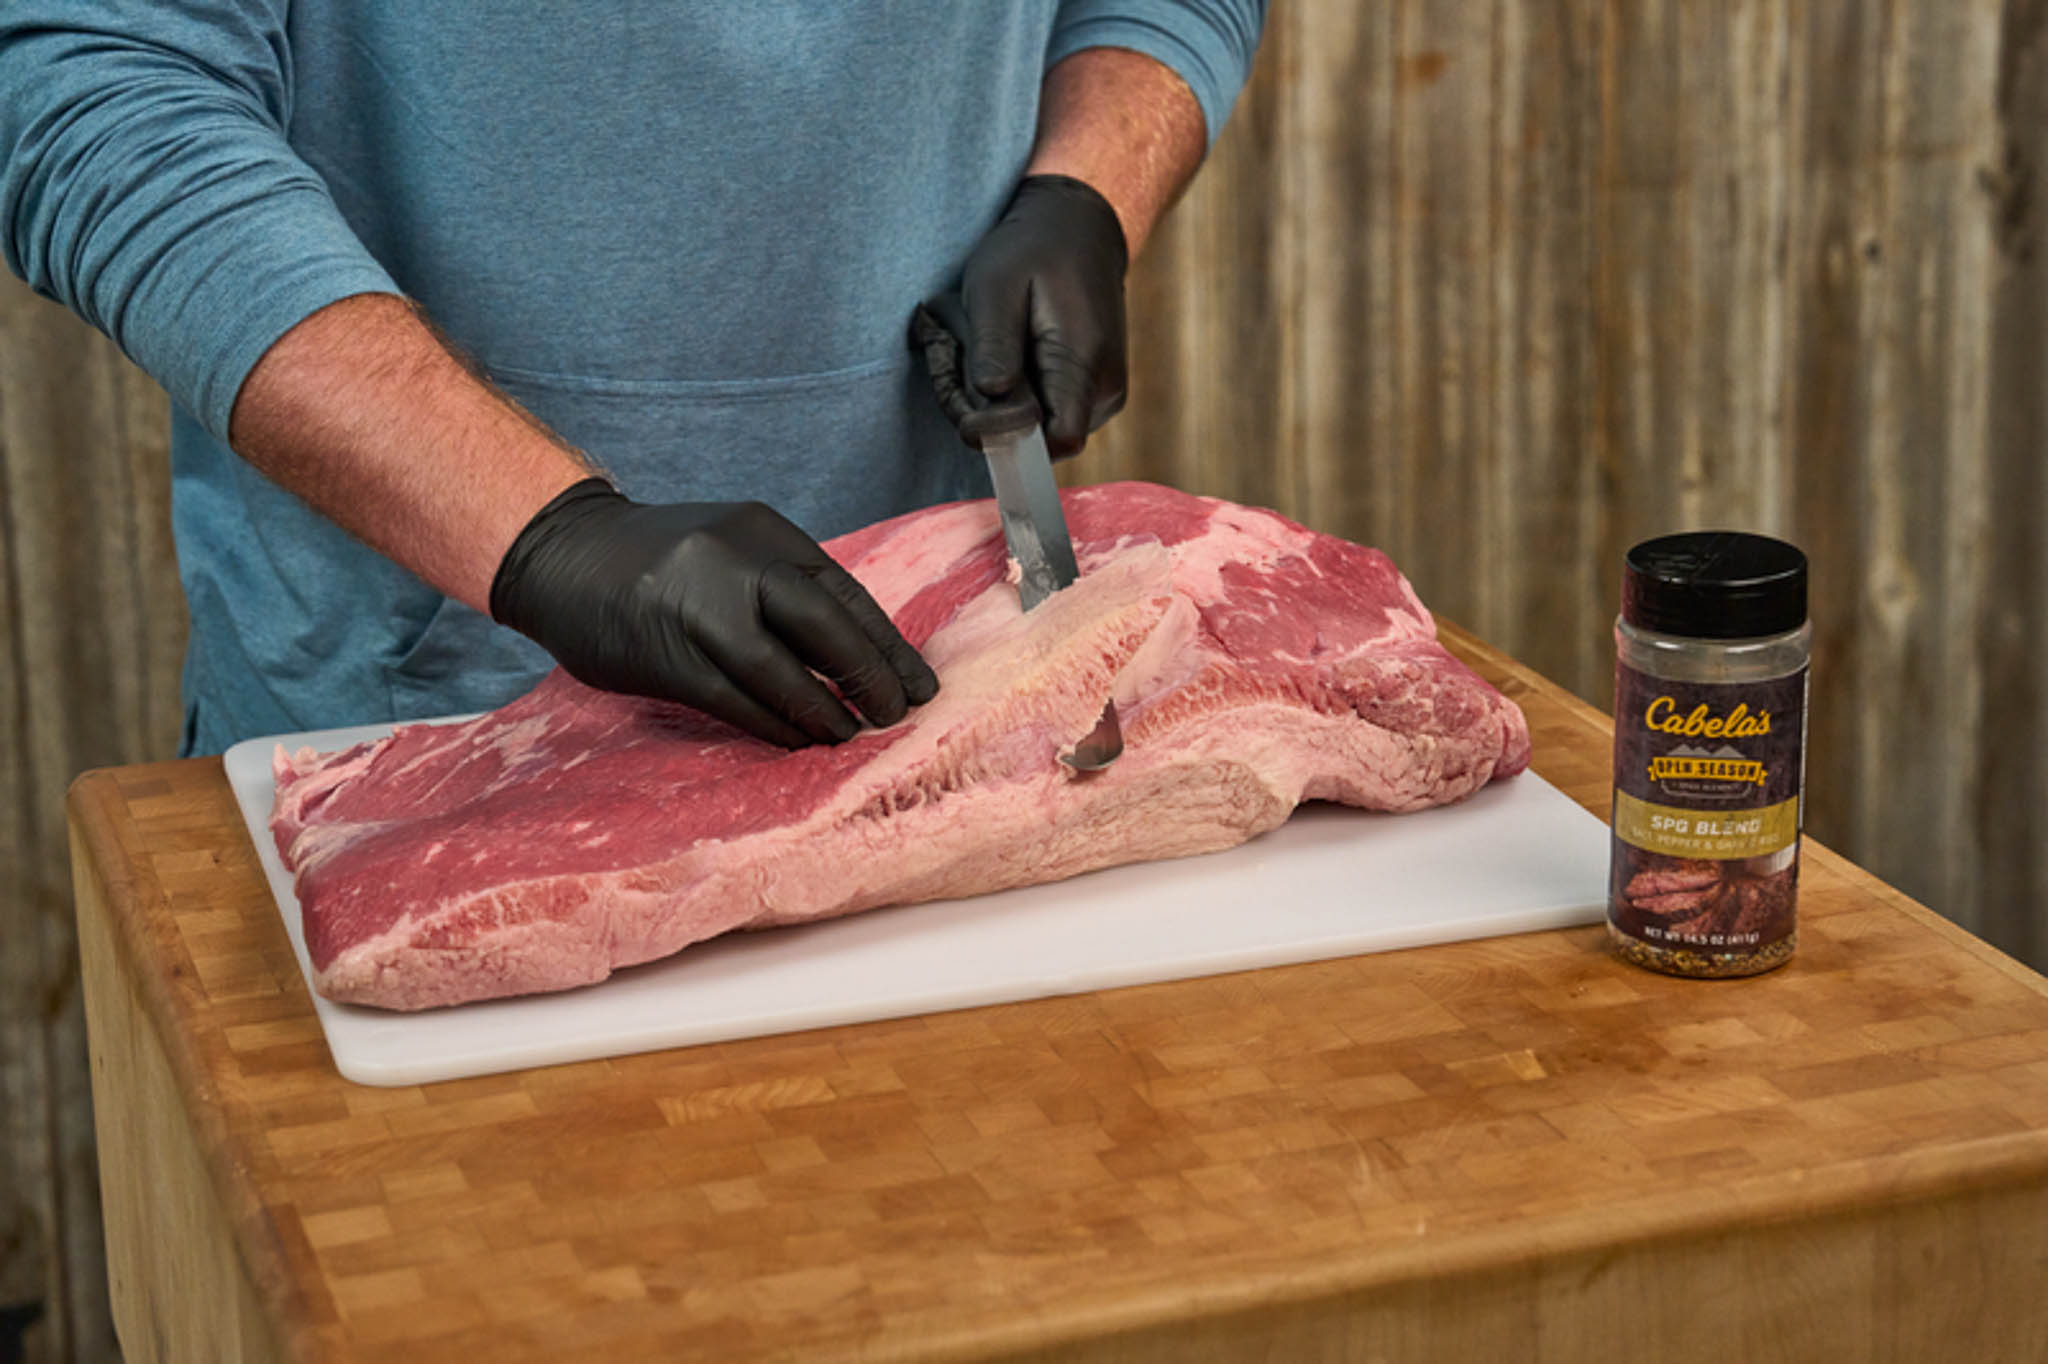 Remove excess fat from brisket